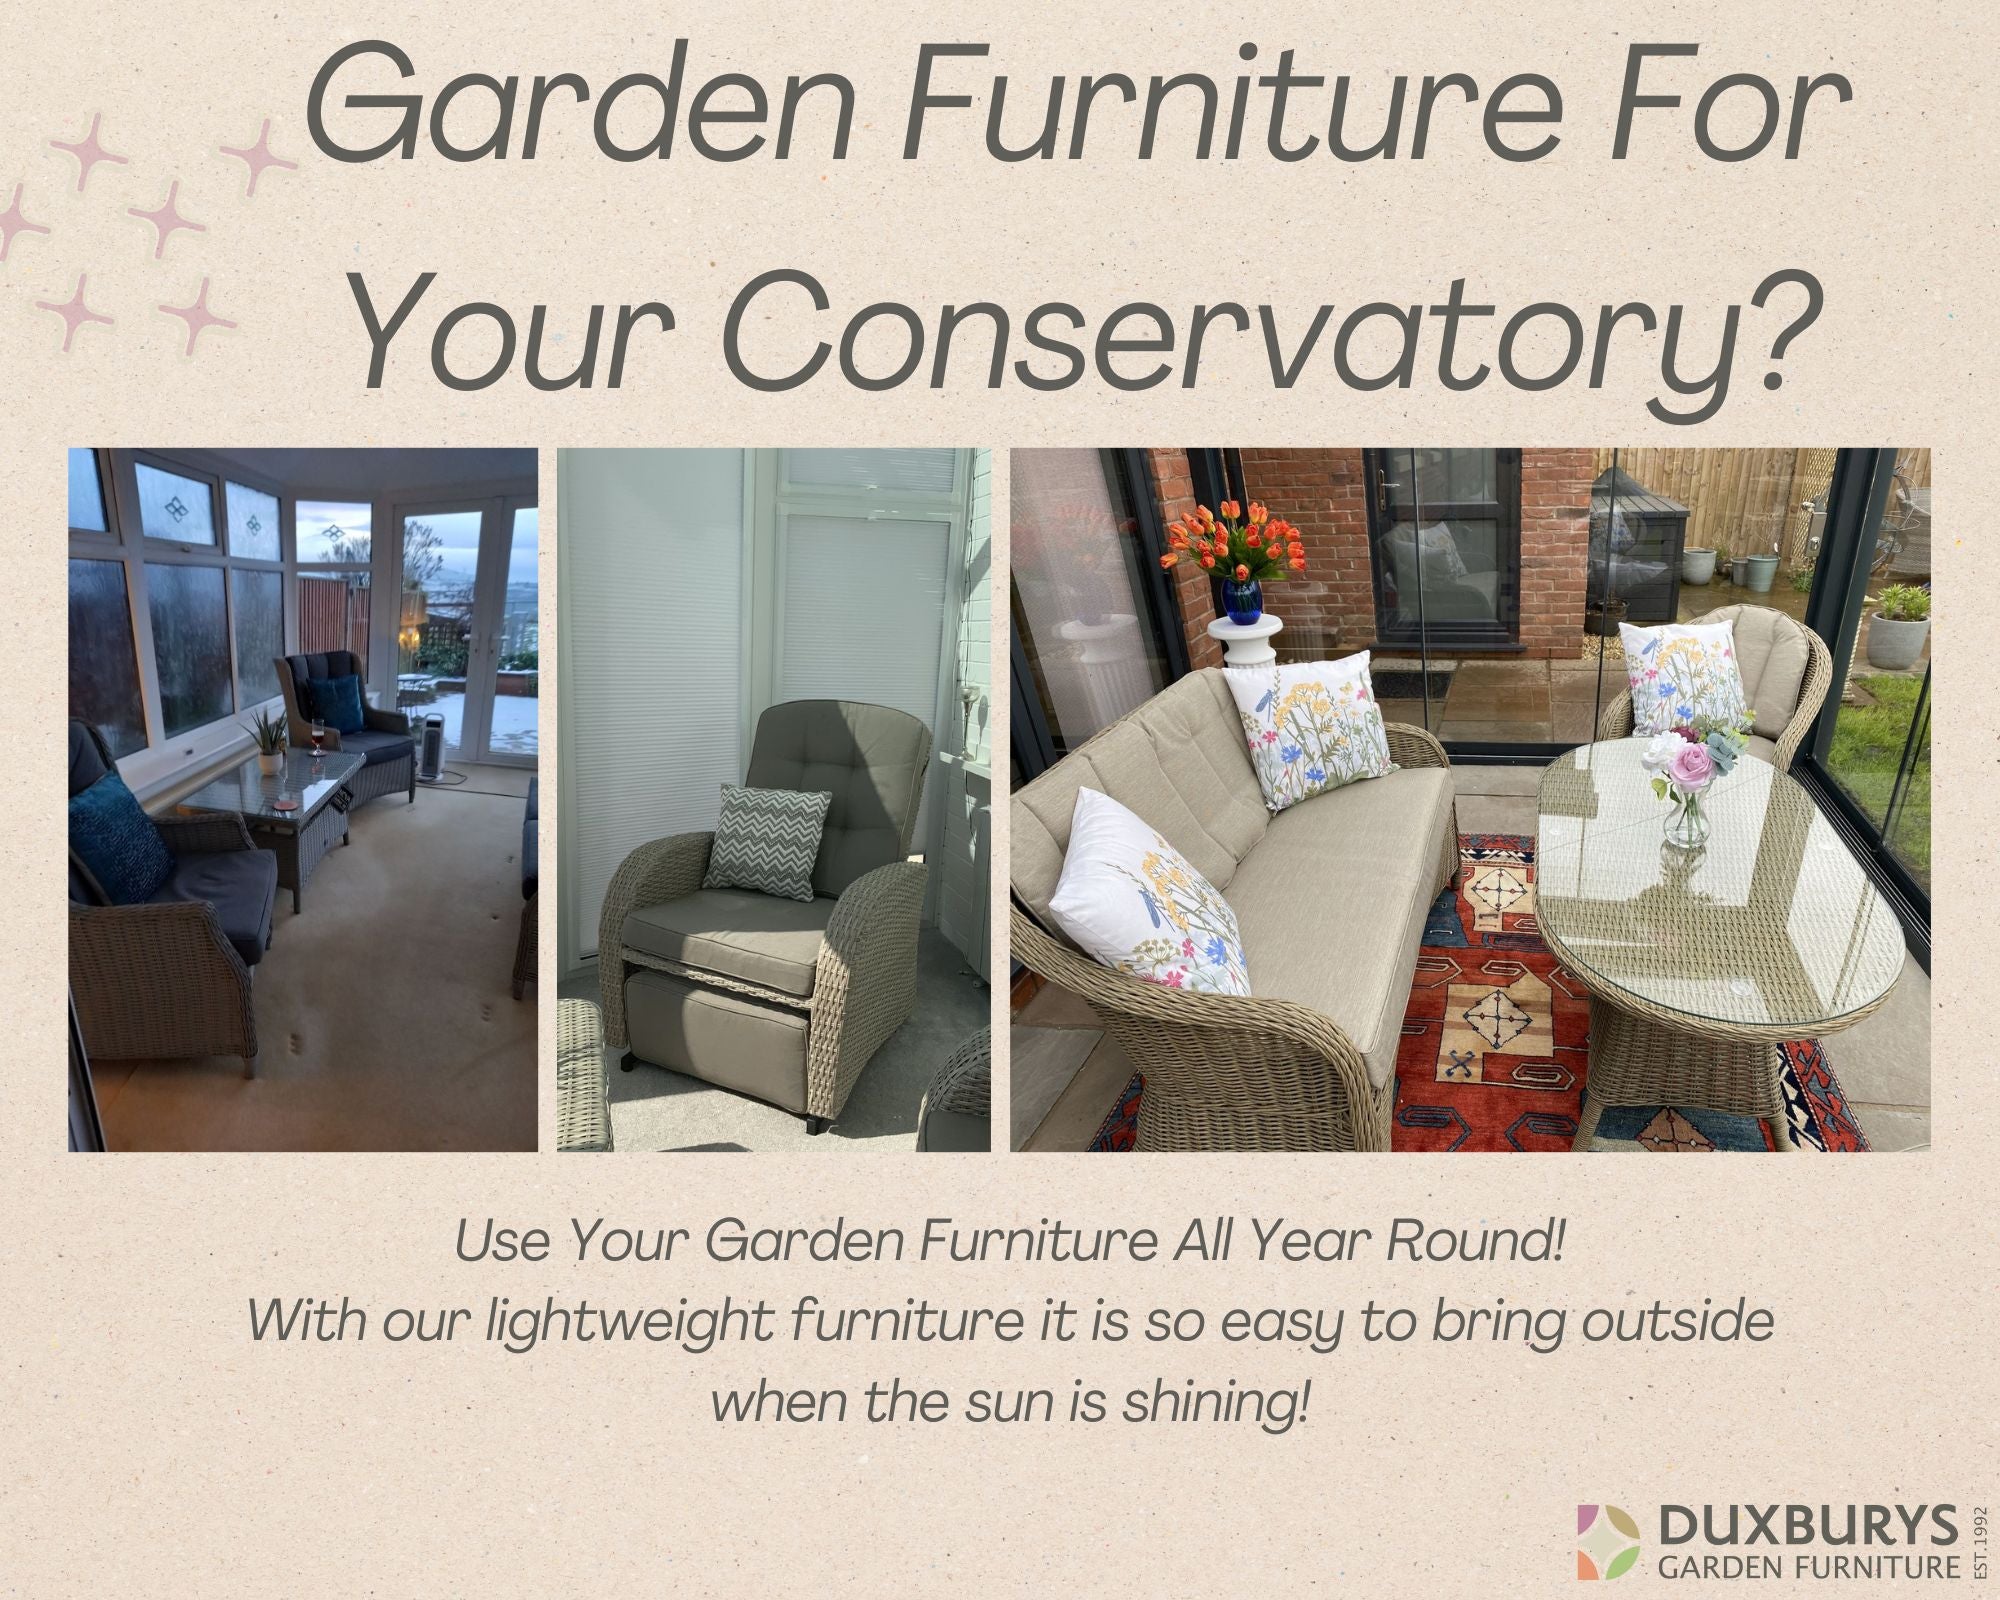 Garden Furniture For Your Conservatory?